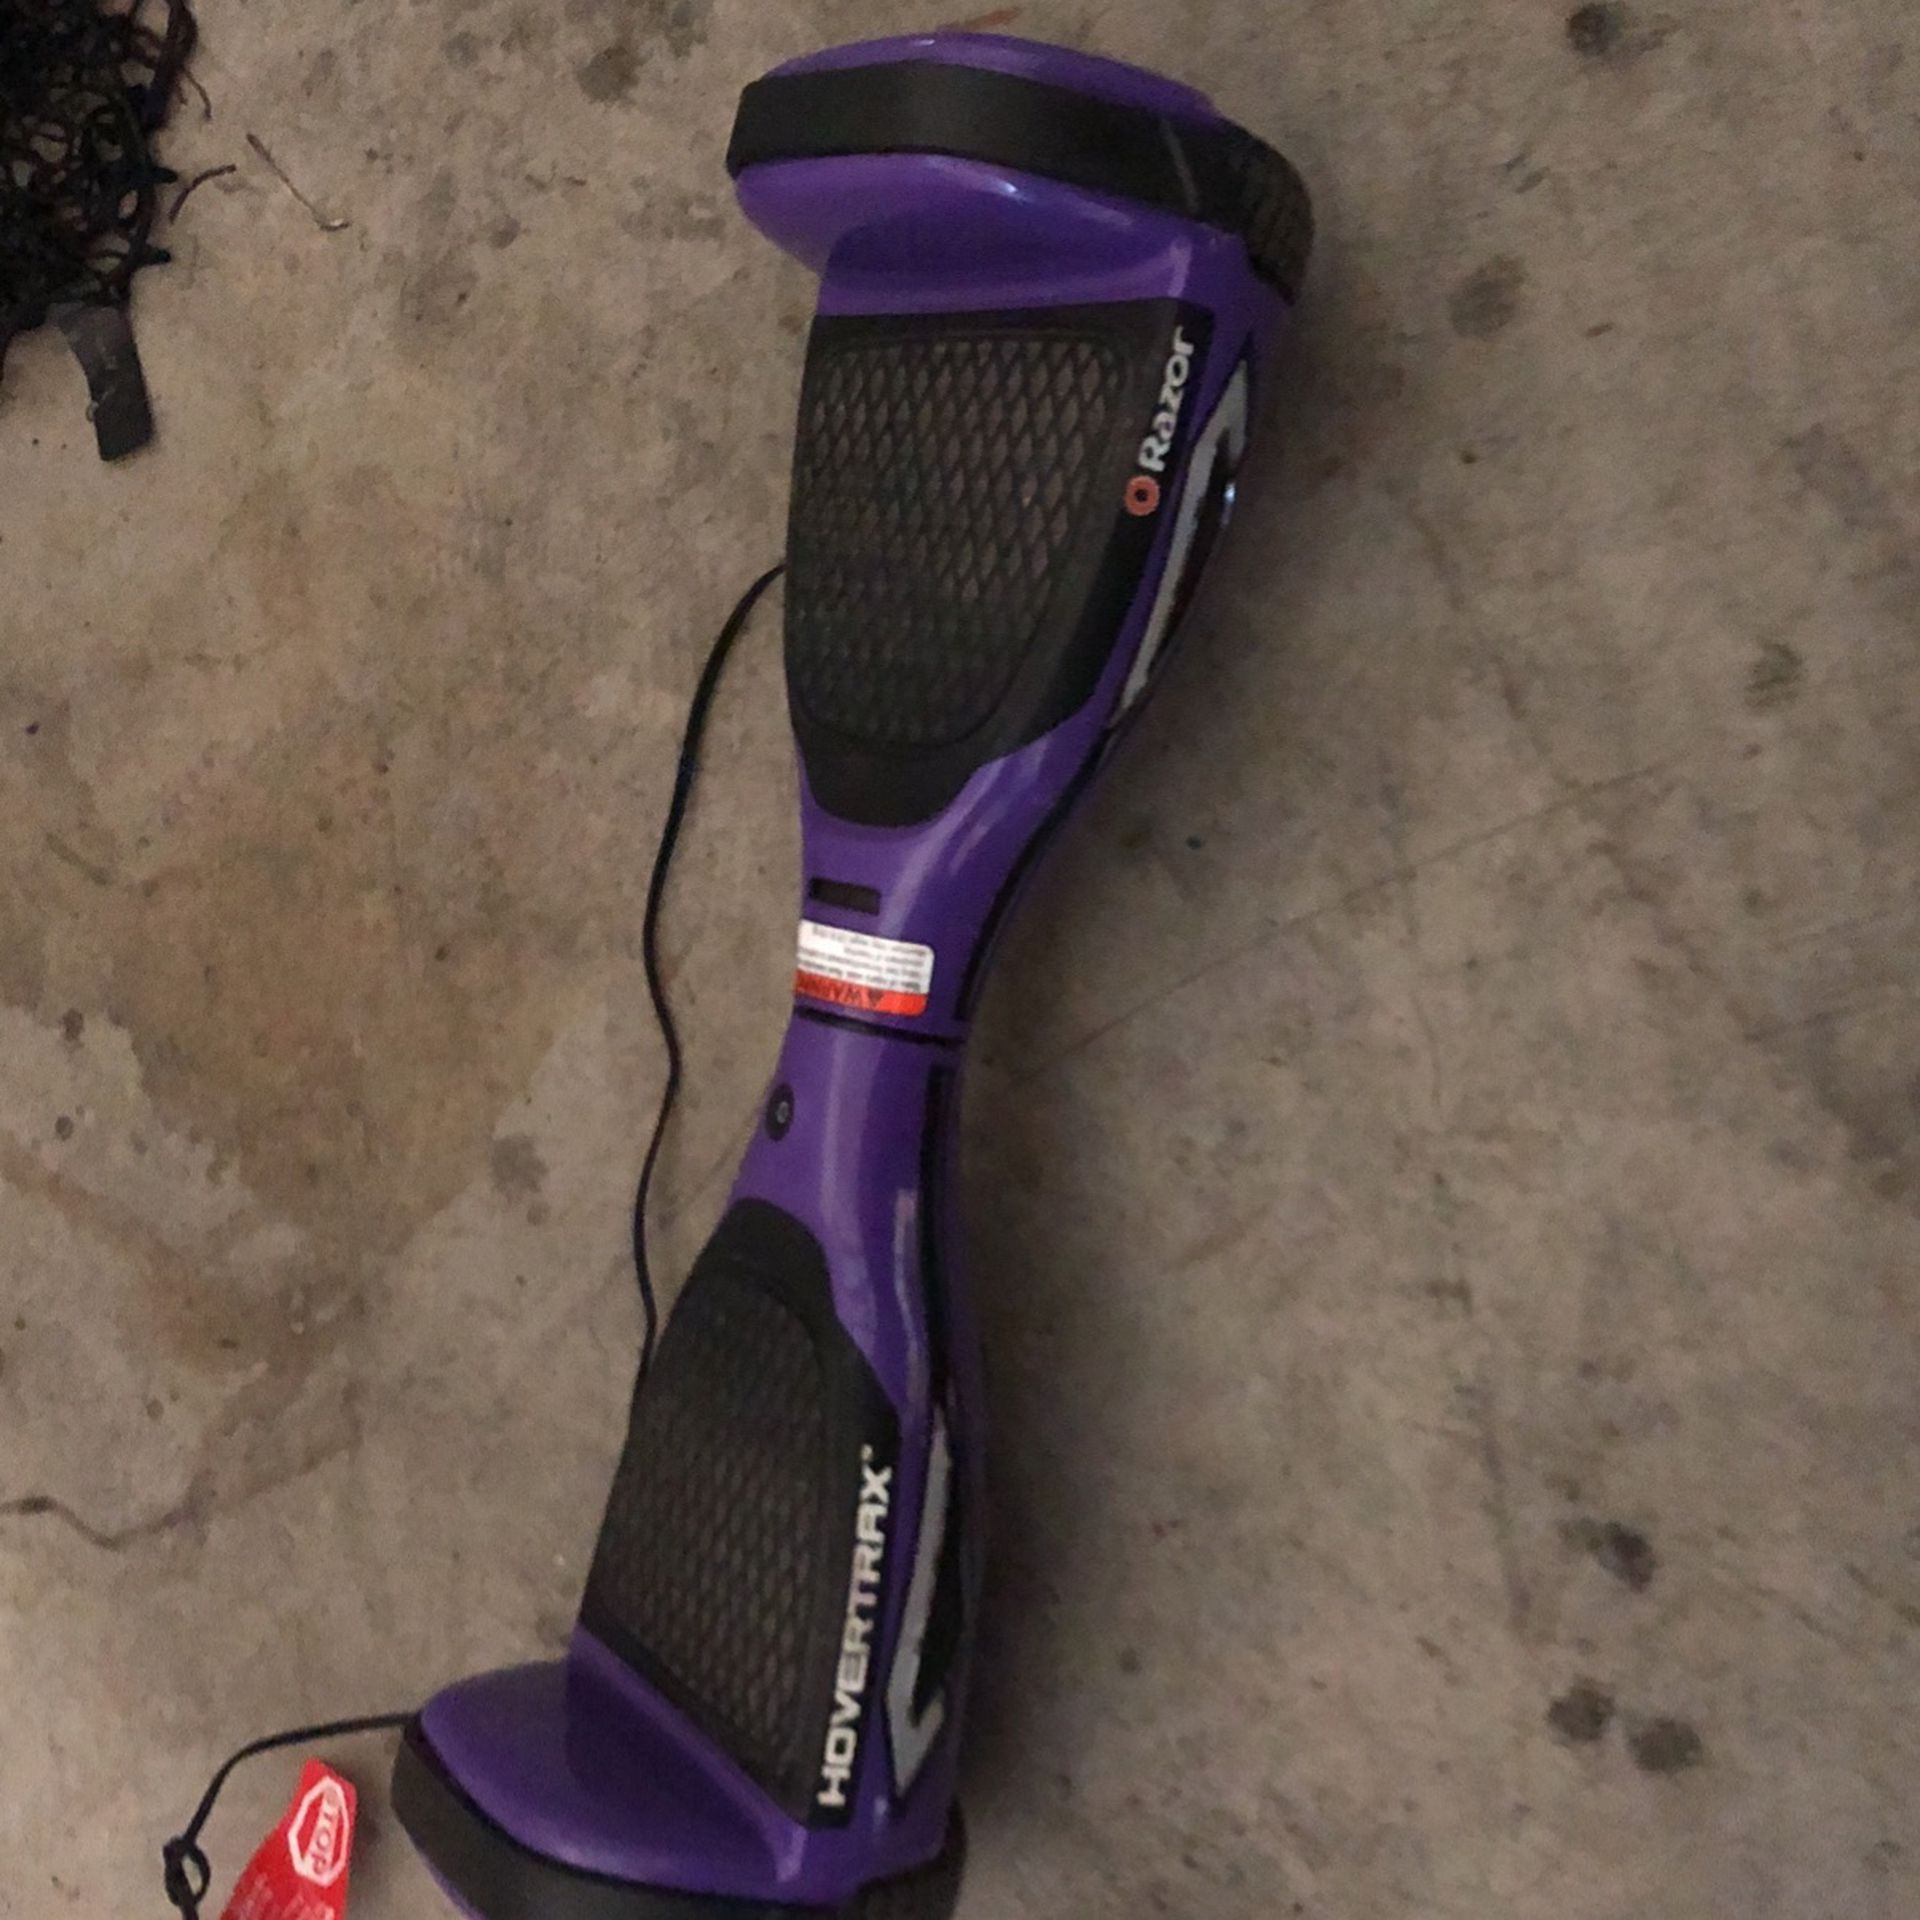 Hoverboard For Sale Asking For 115